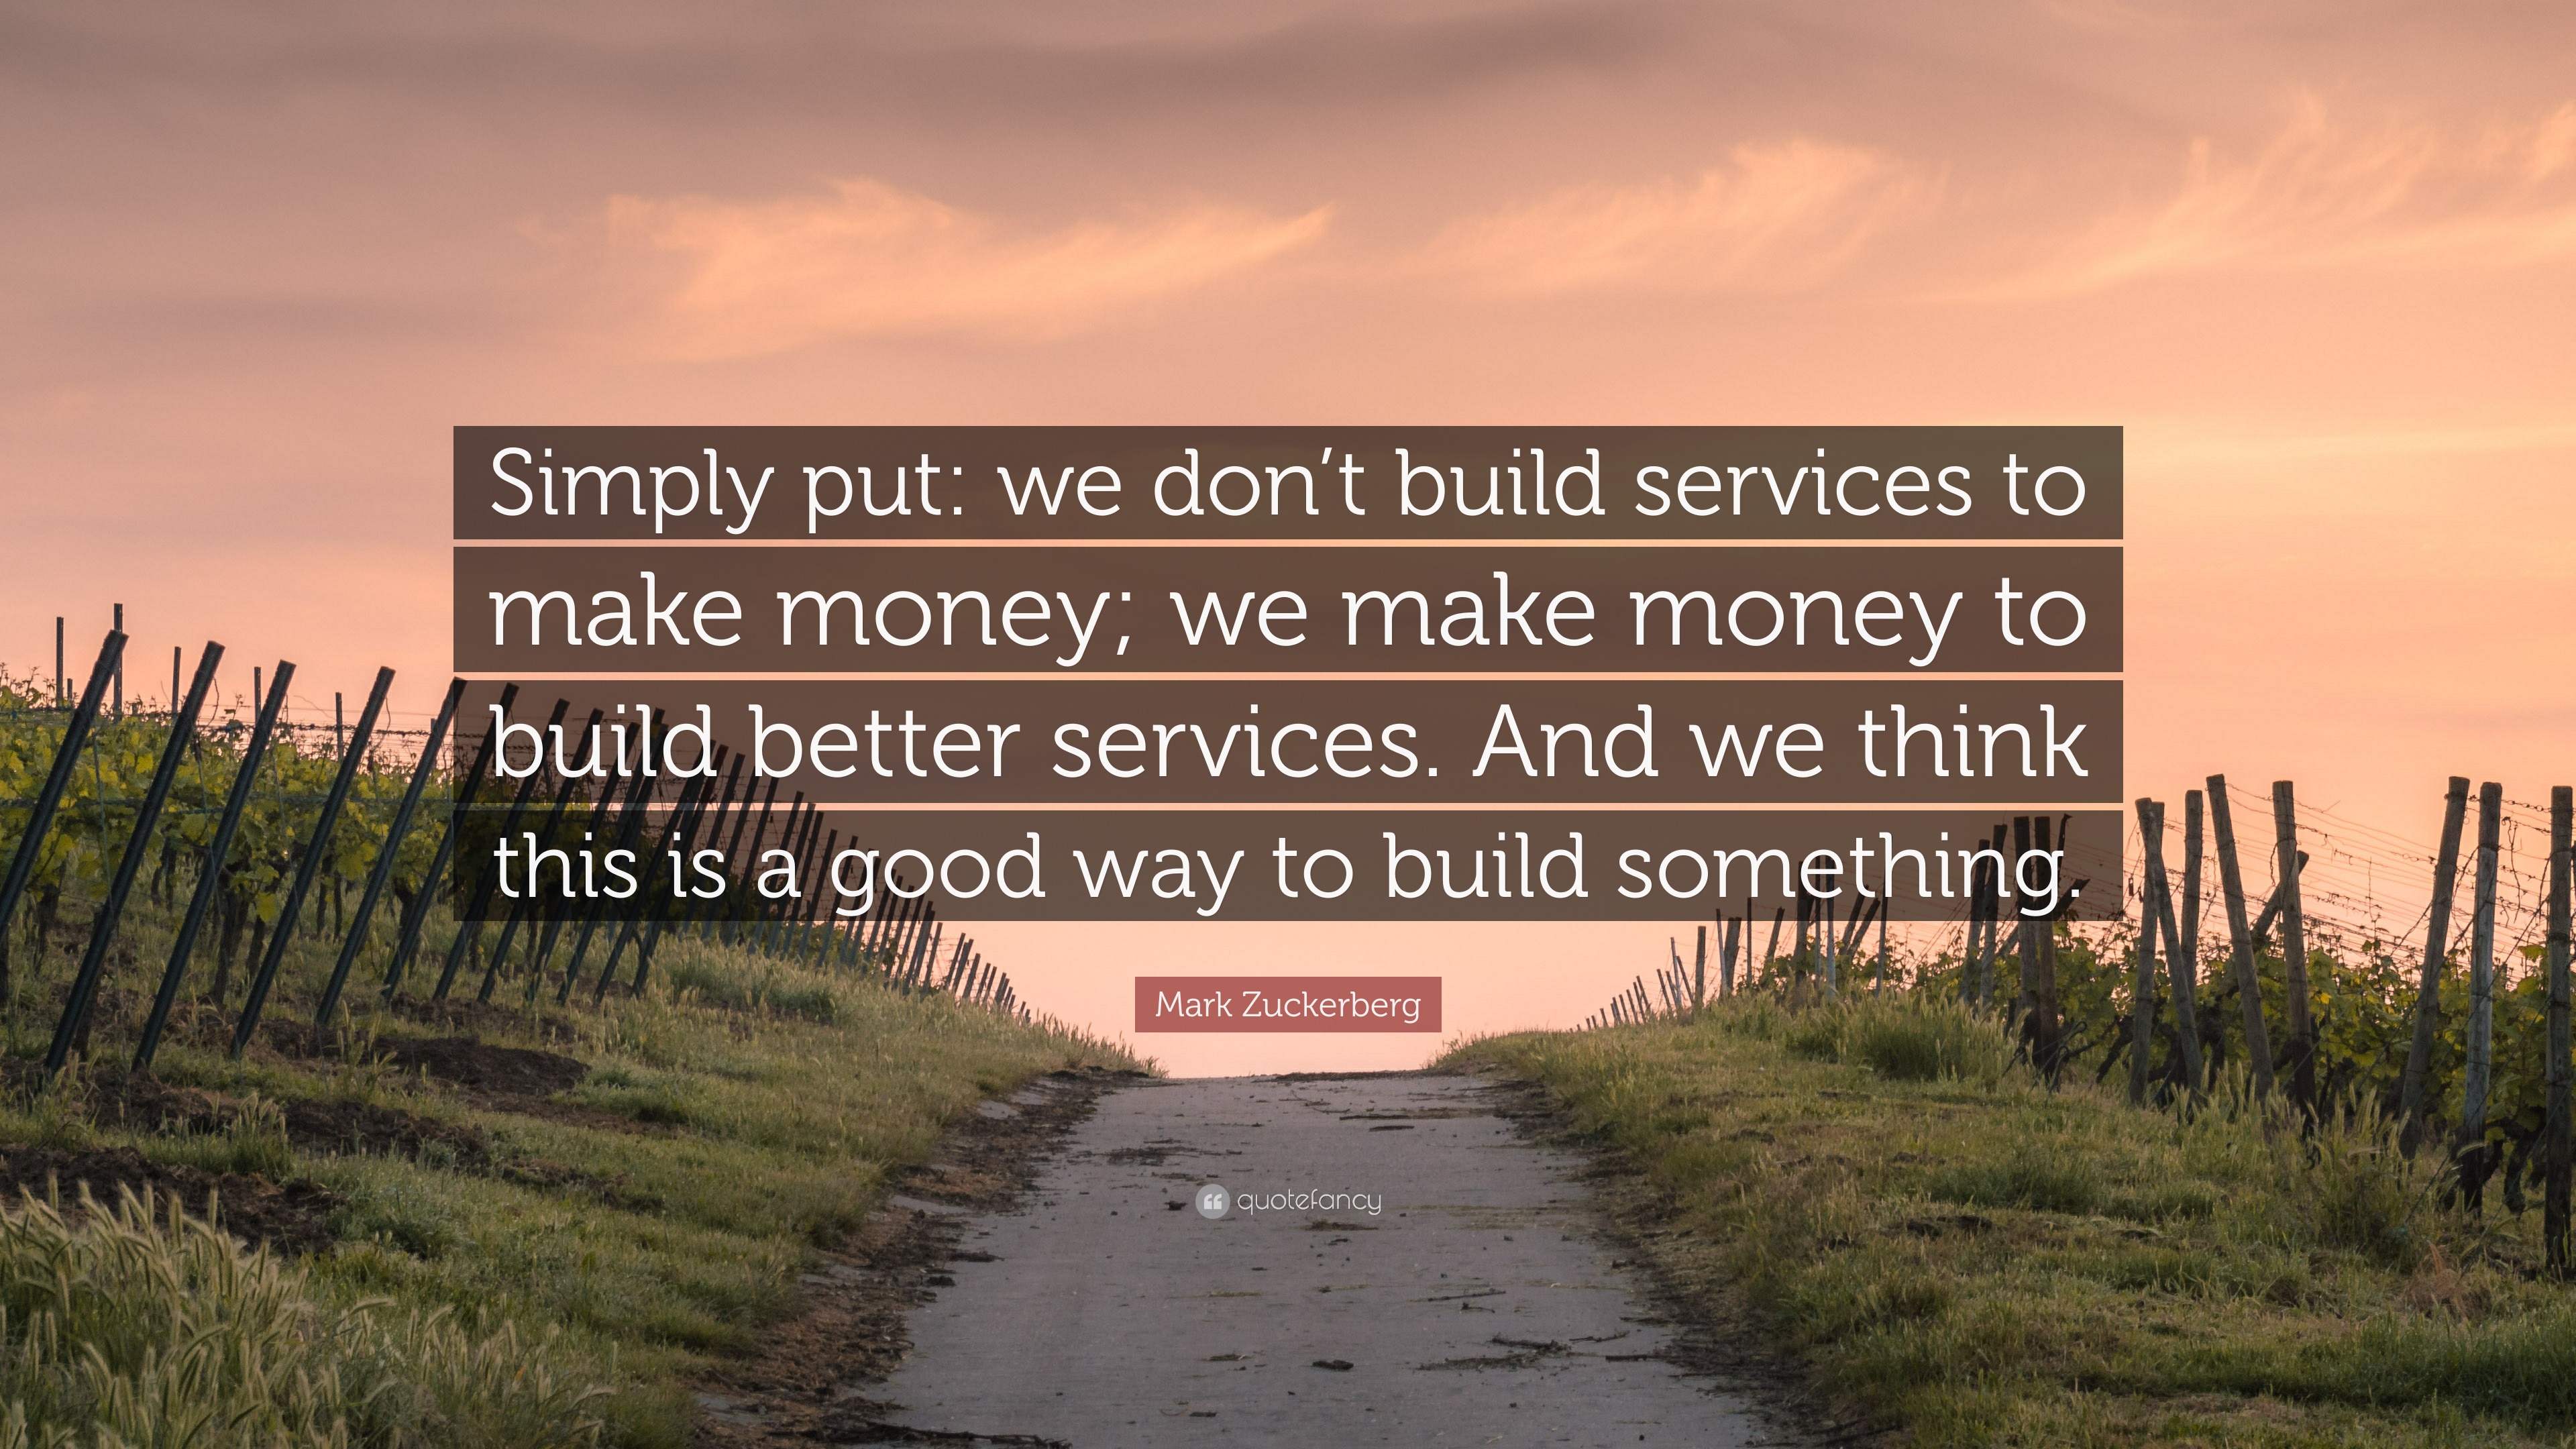 we make money to build better services